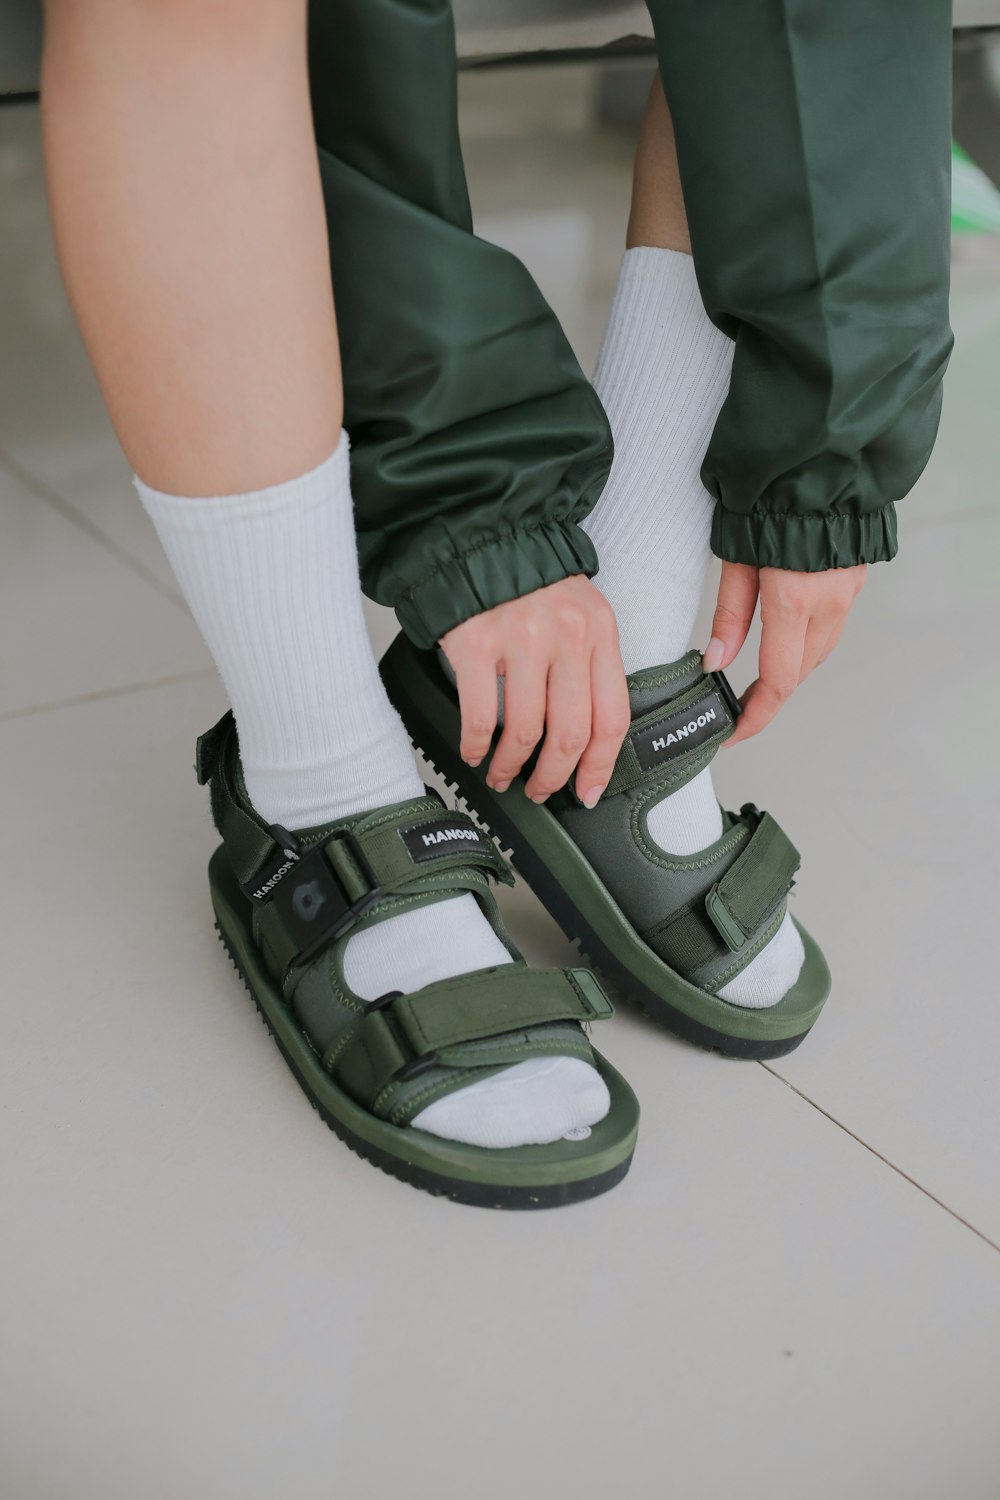 a person putting on a pair of green sandals